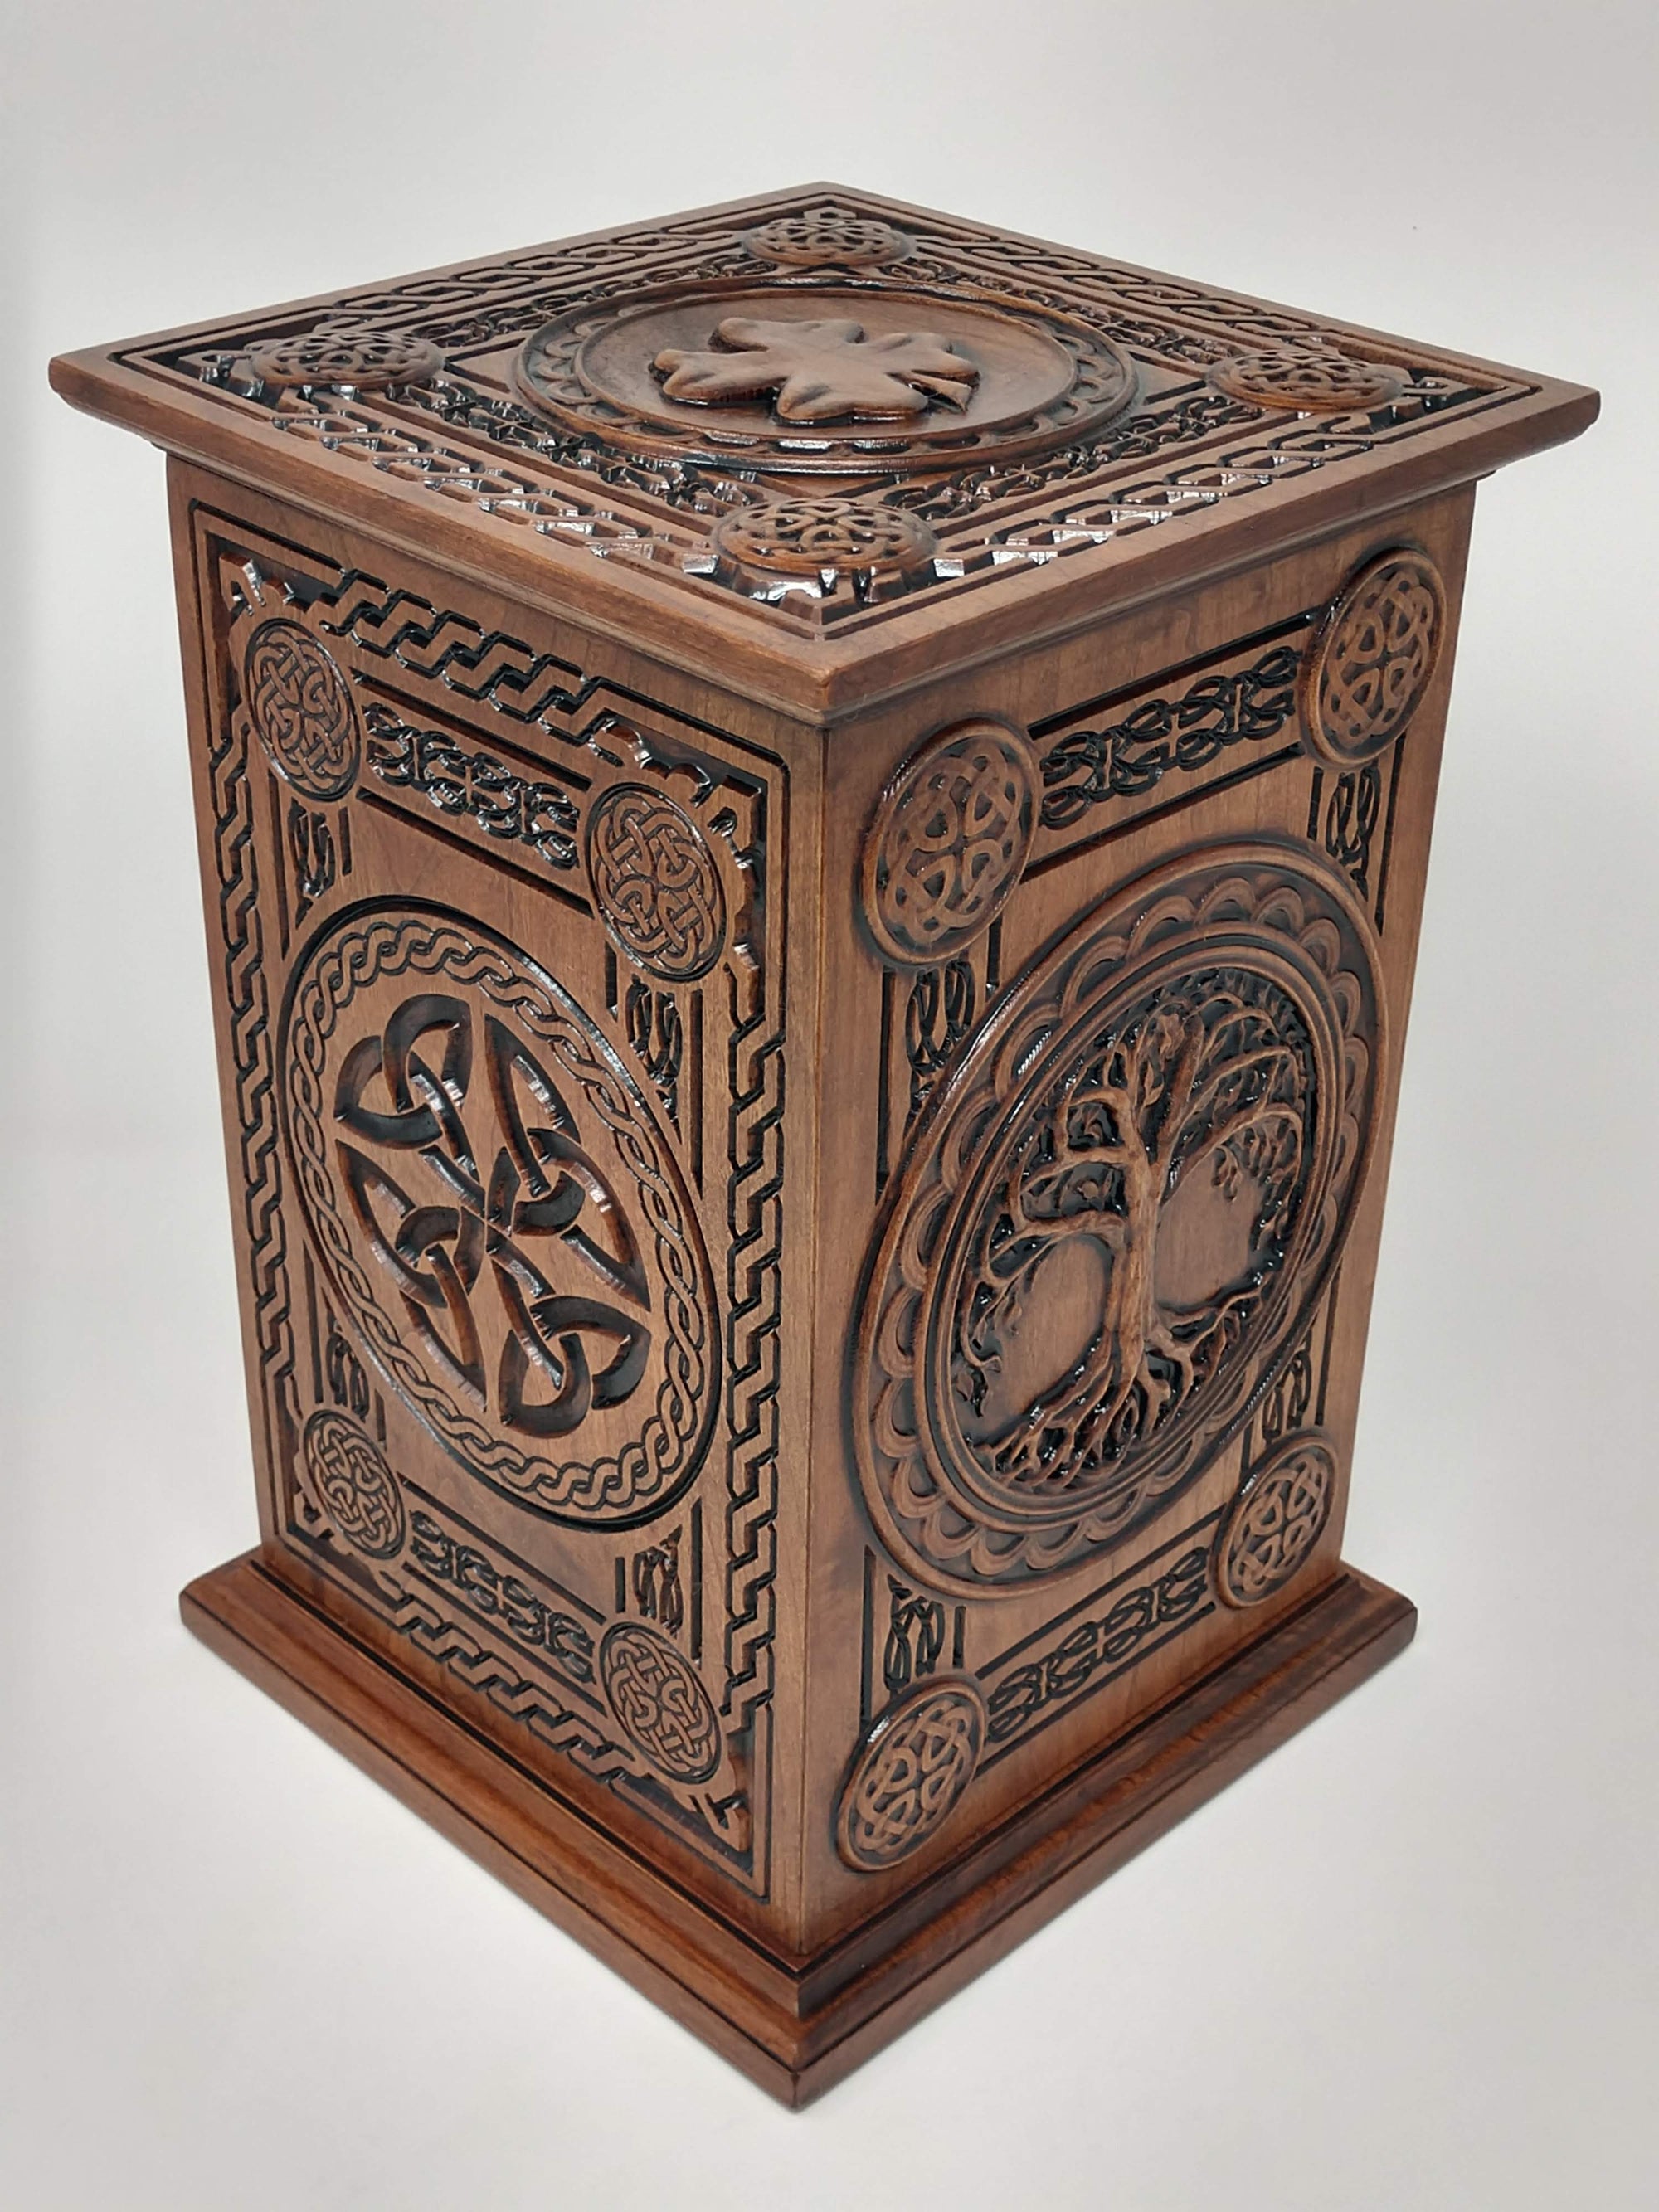 Images shows the urn from the left corner showing the left side with the Celtic Trinity knots and other celtic weaves and knot designs and boarders with the shamrock/four leaf clover caring on the top. The front with the Celtic Tree of Life us shown in this image of the ash urns for humans